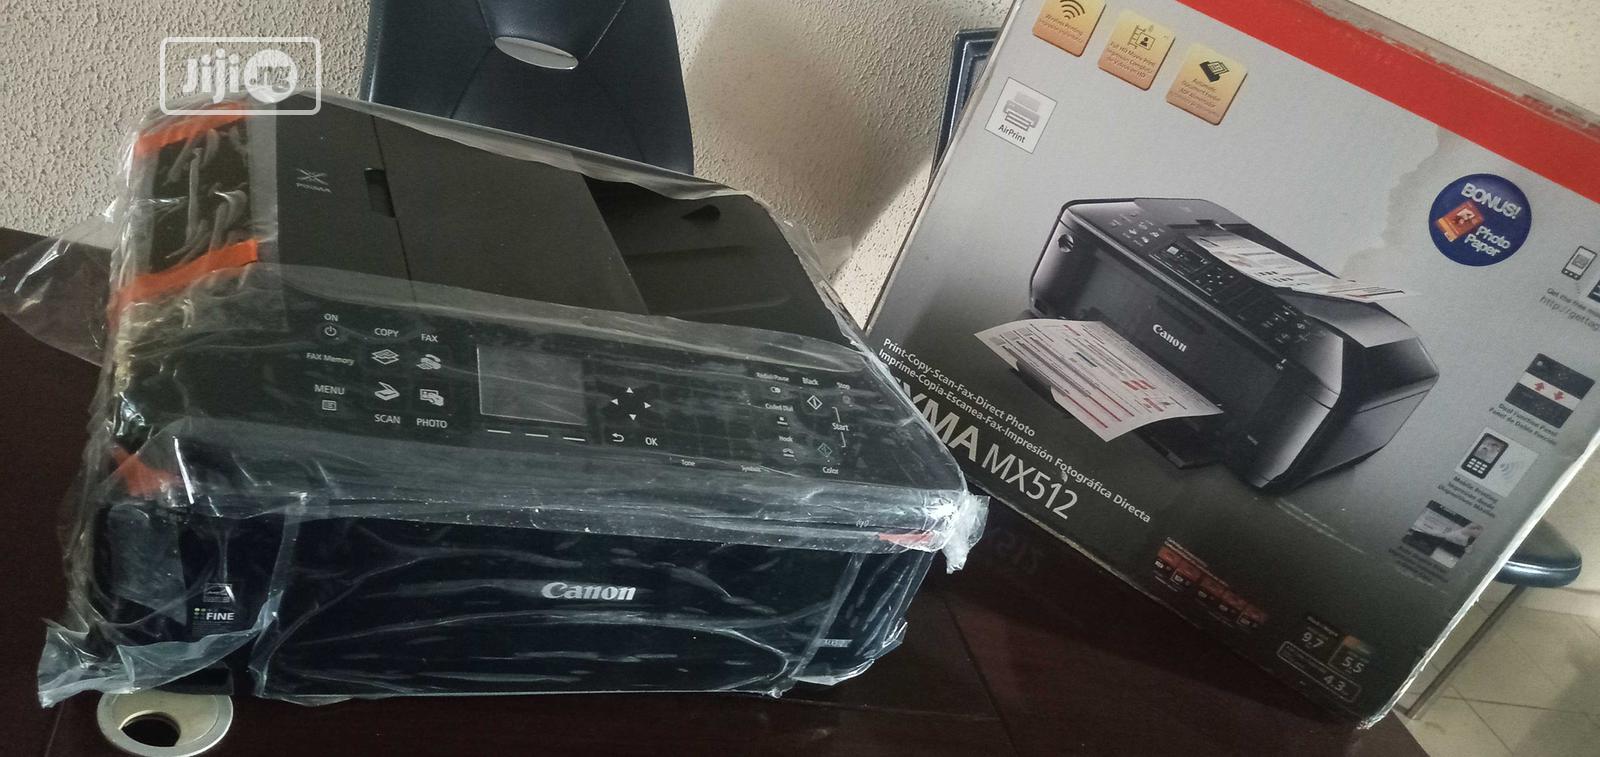 how to scan using canon pixma mx512